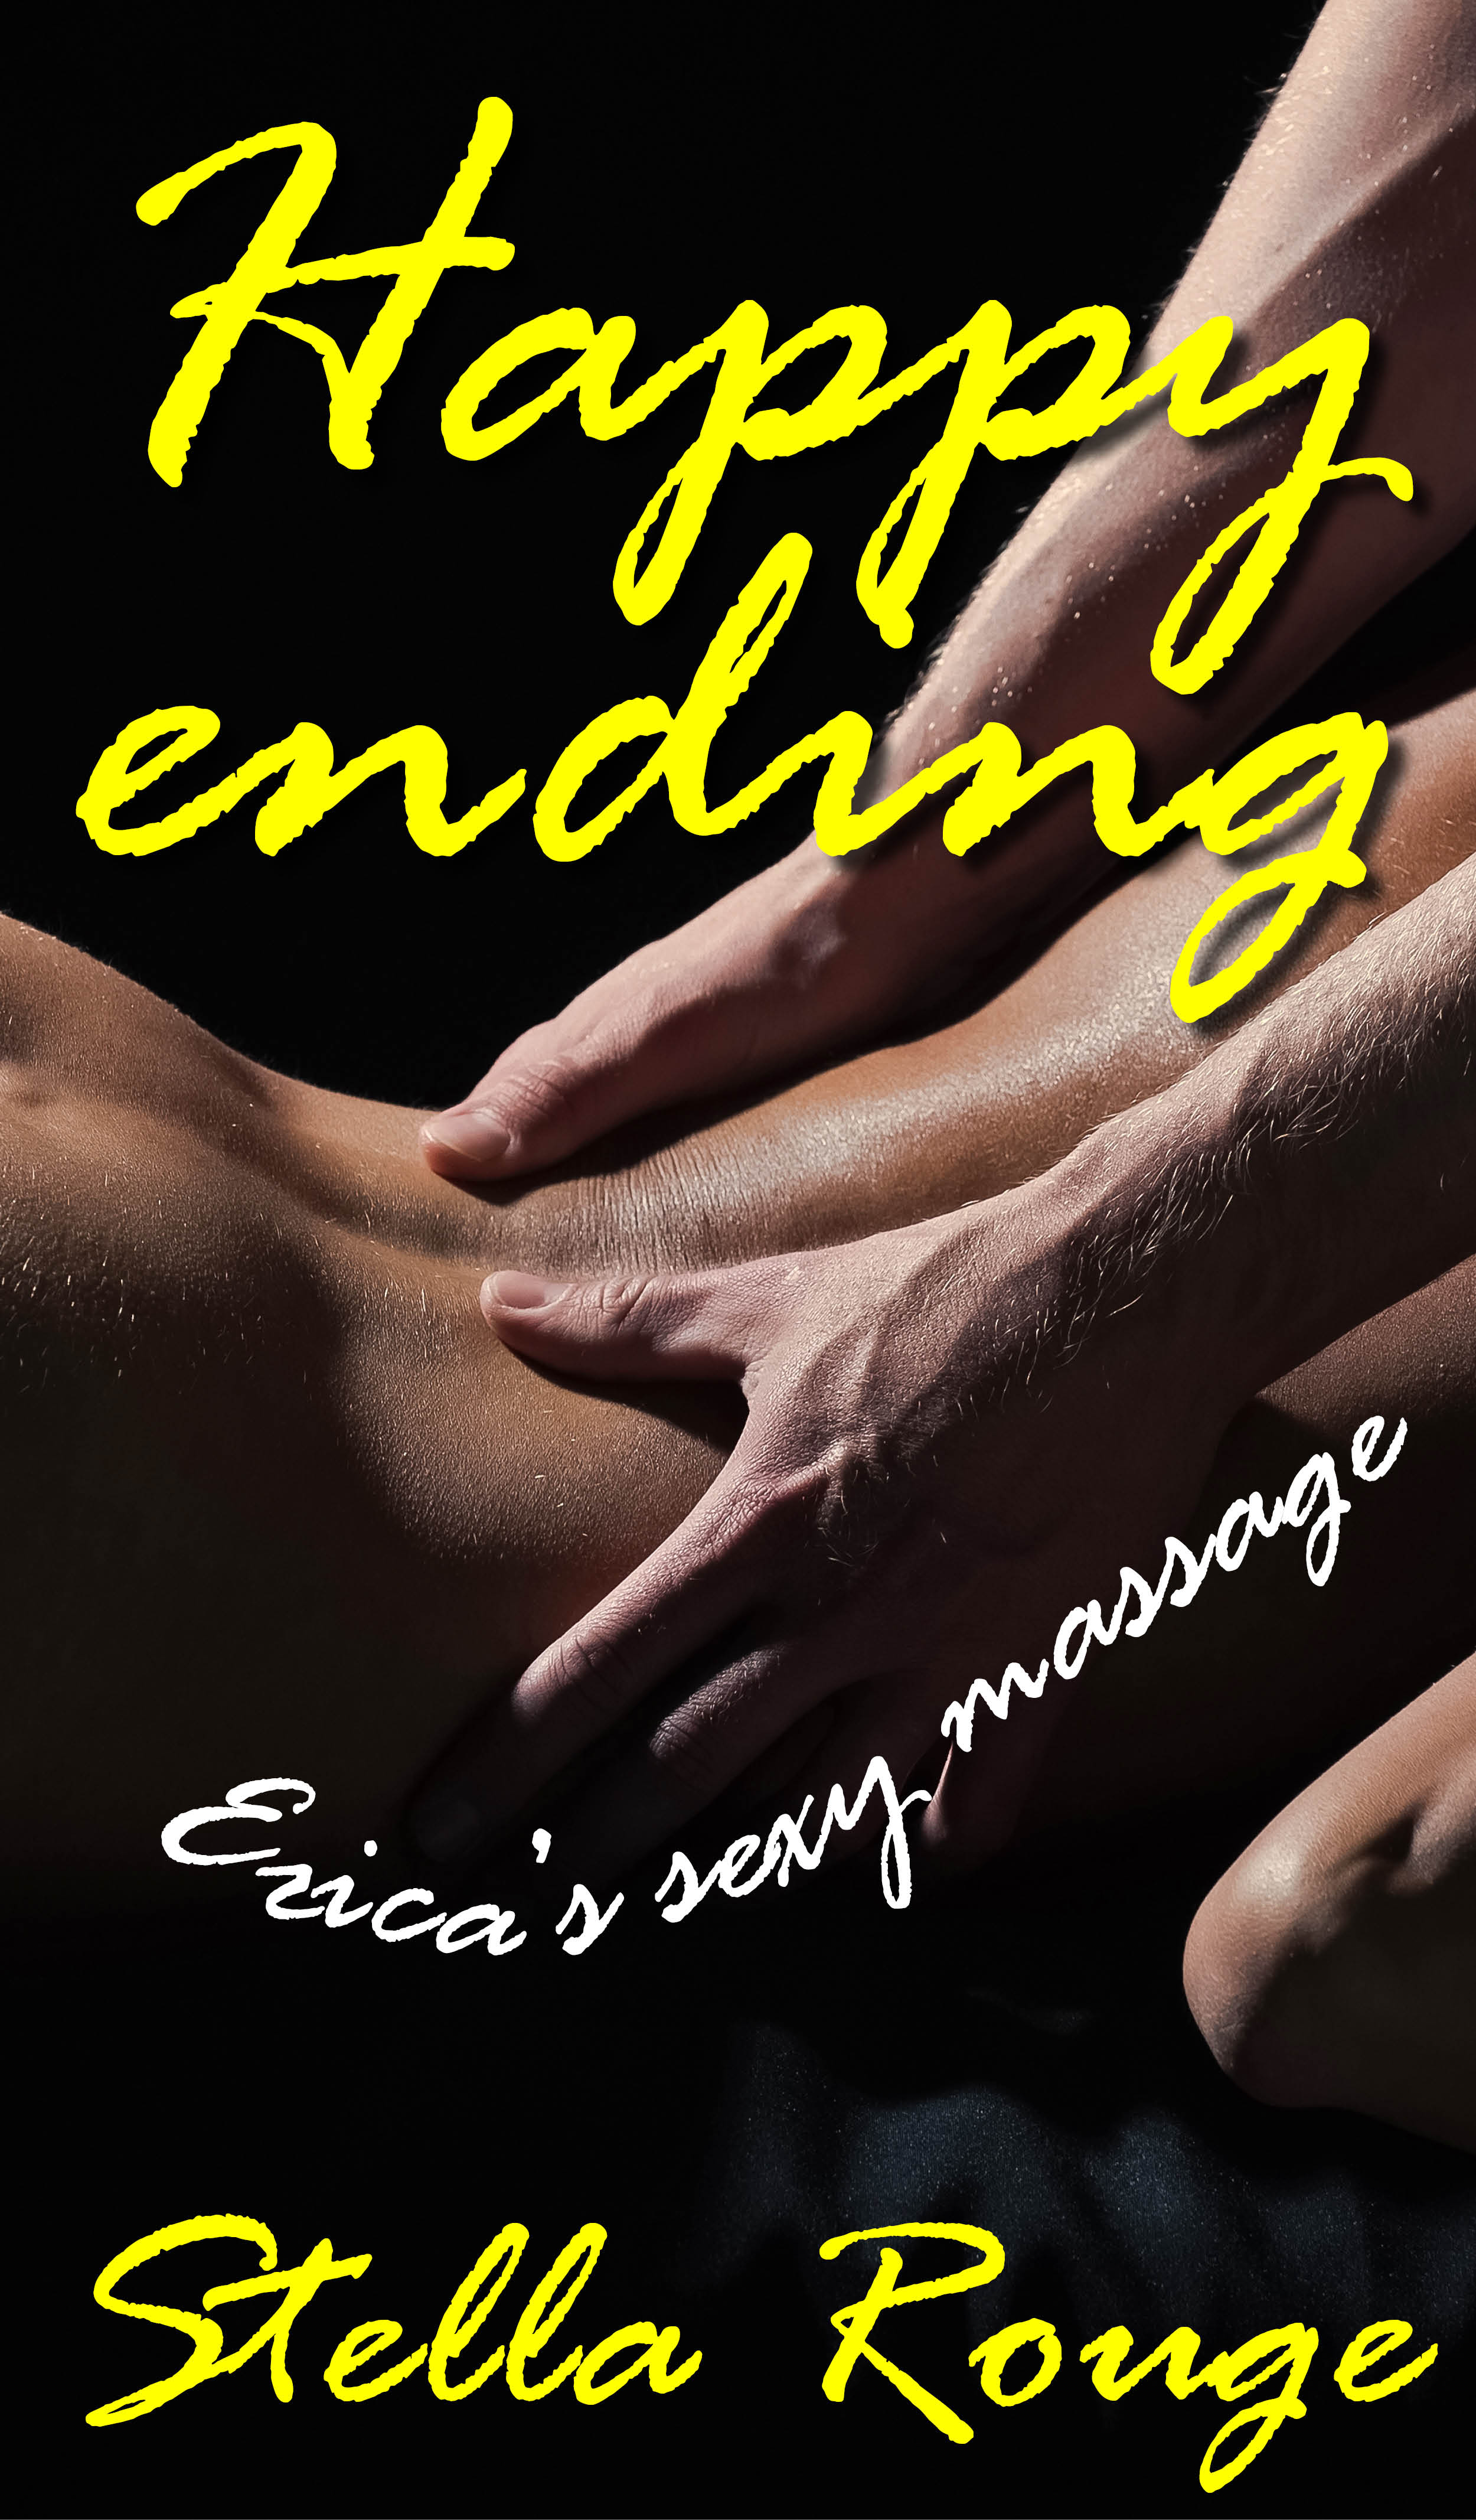 dominic oreilly recommends massage happy emding pic